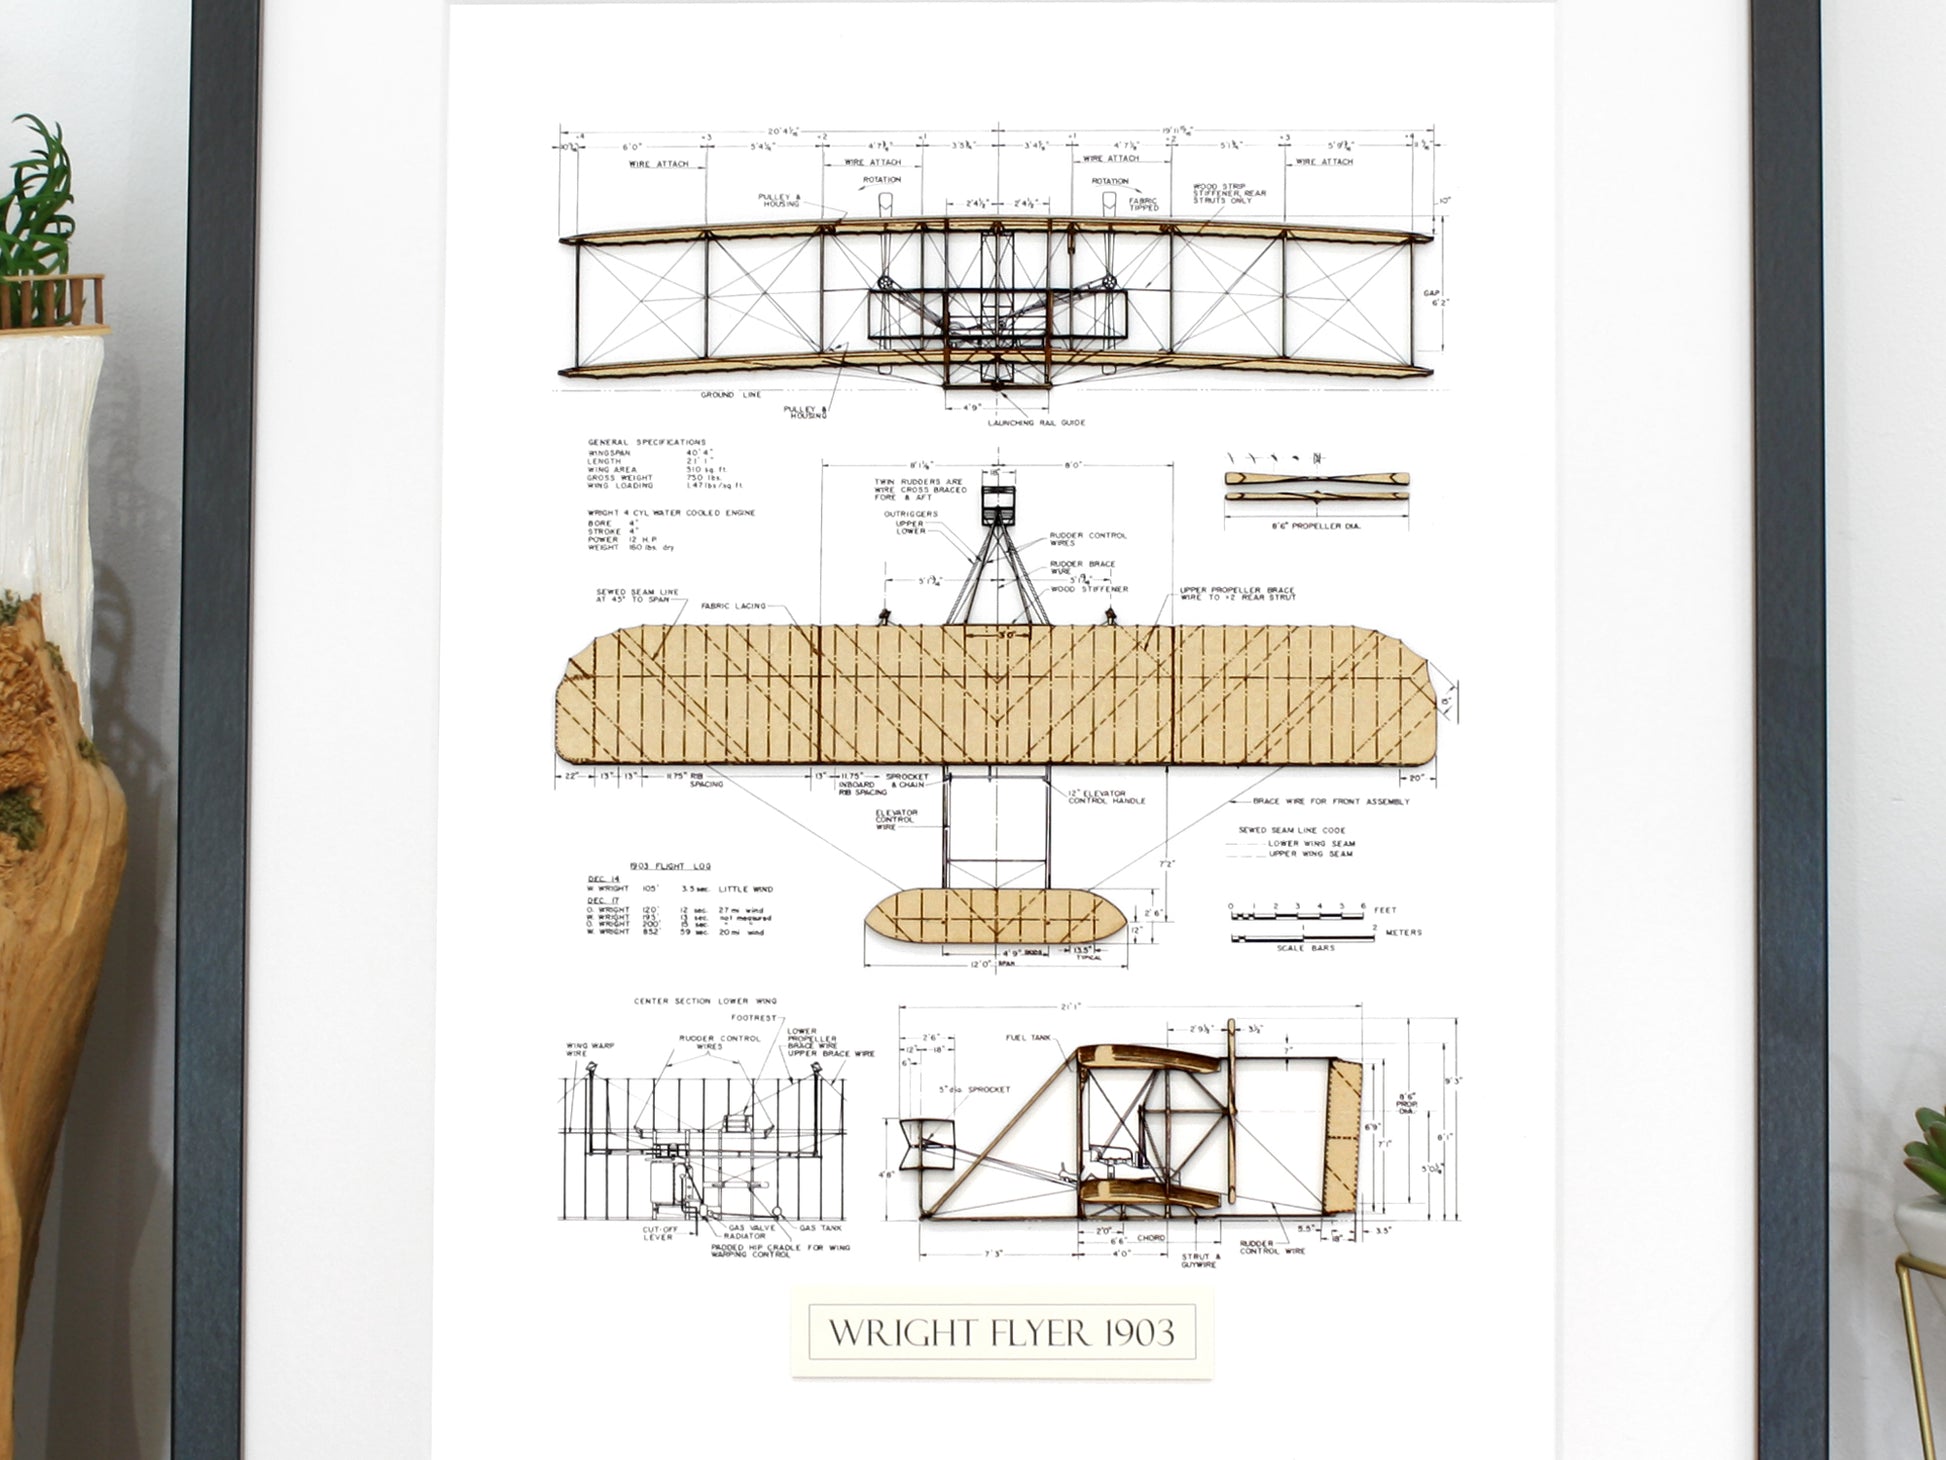 Wright Flyer pilot gifts